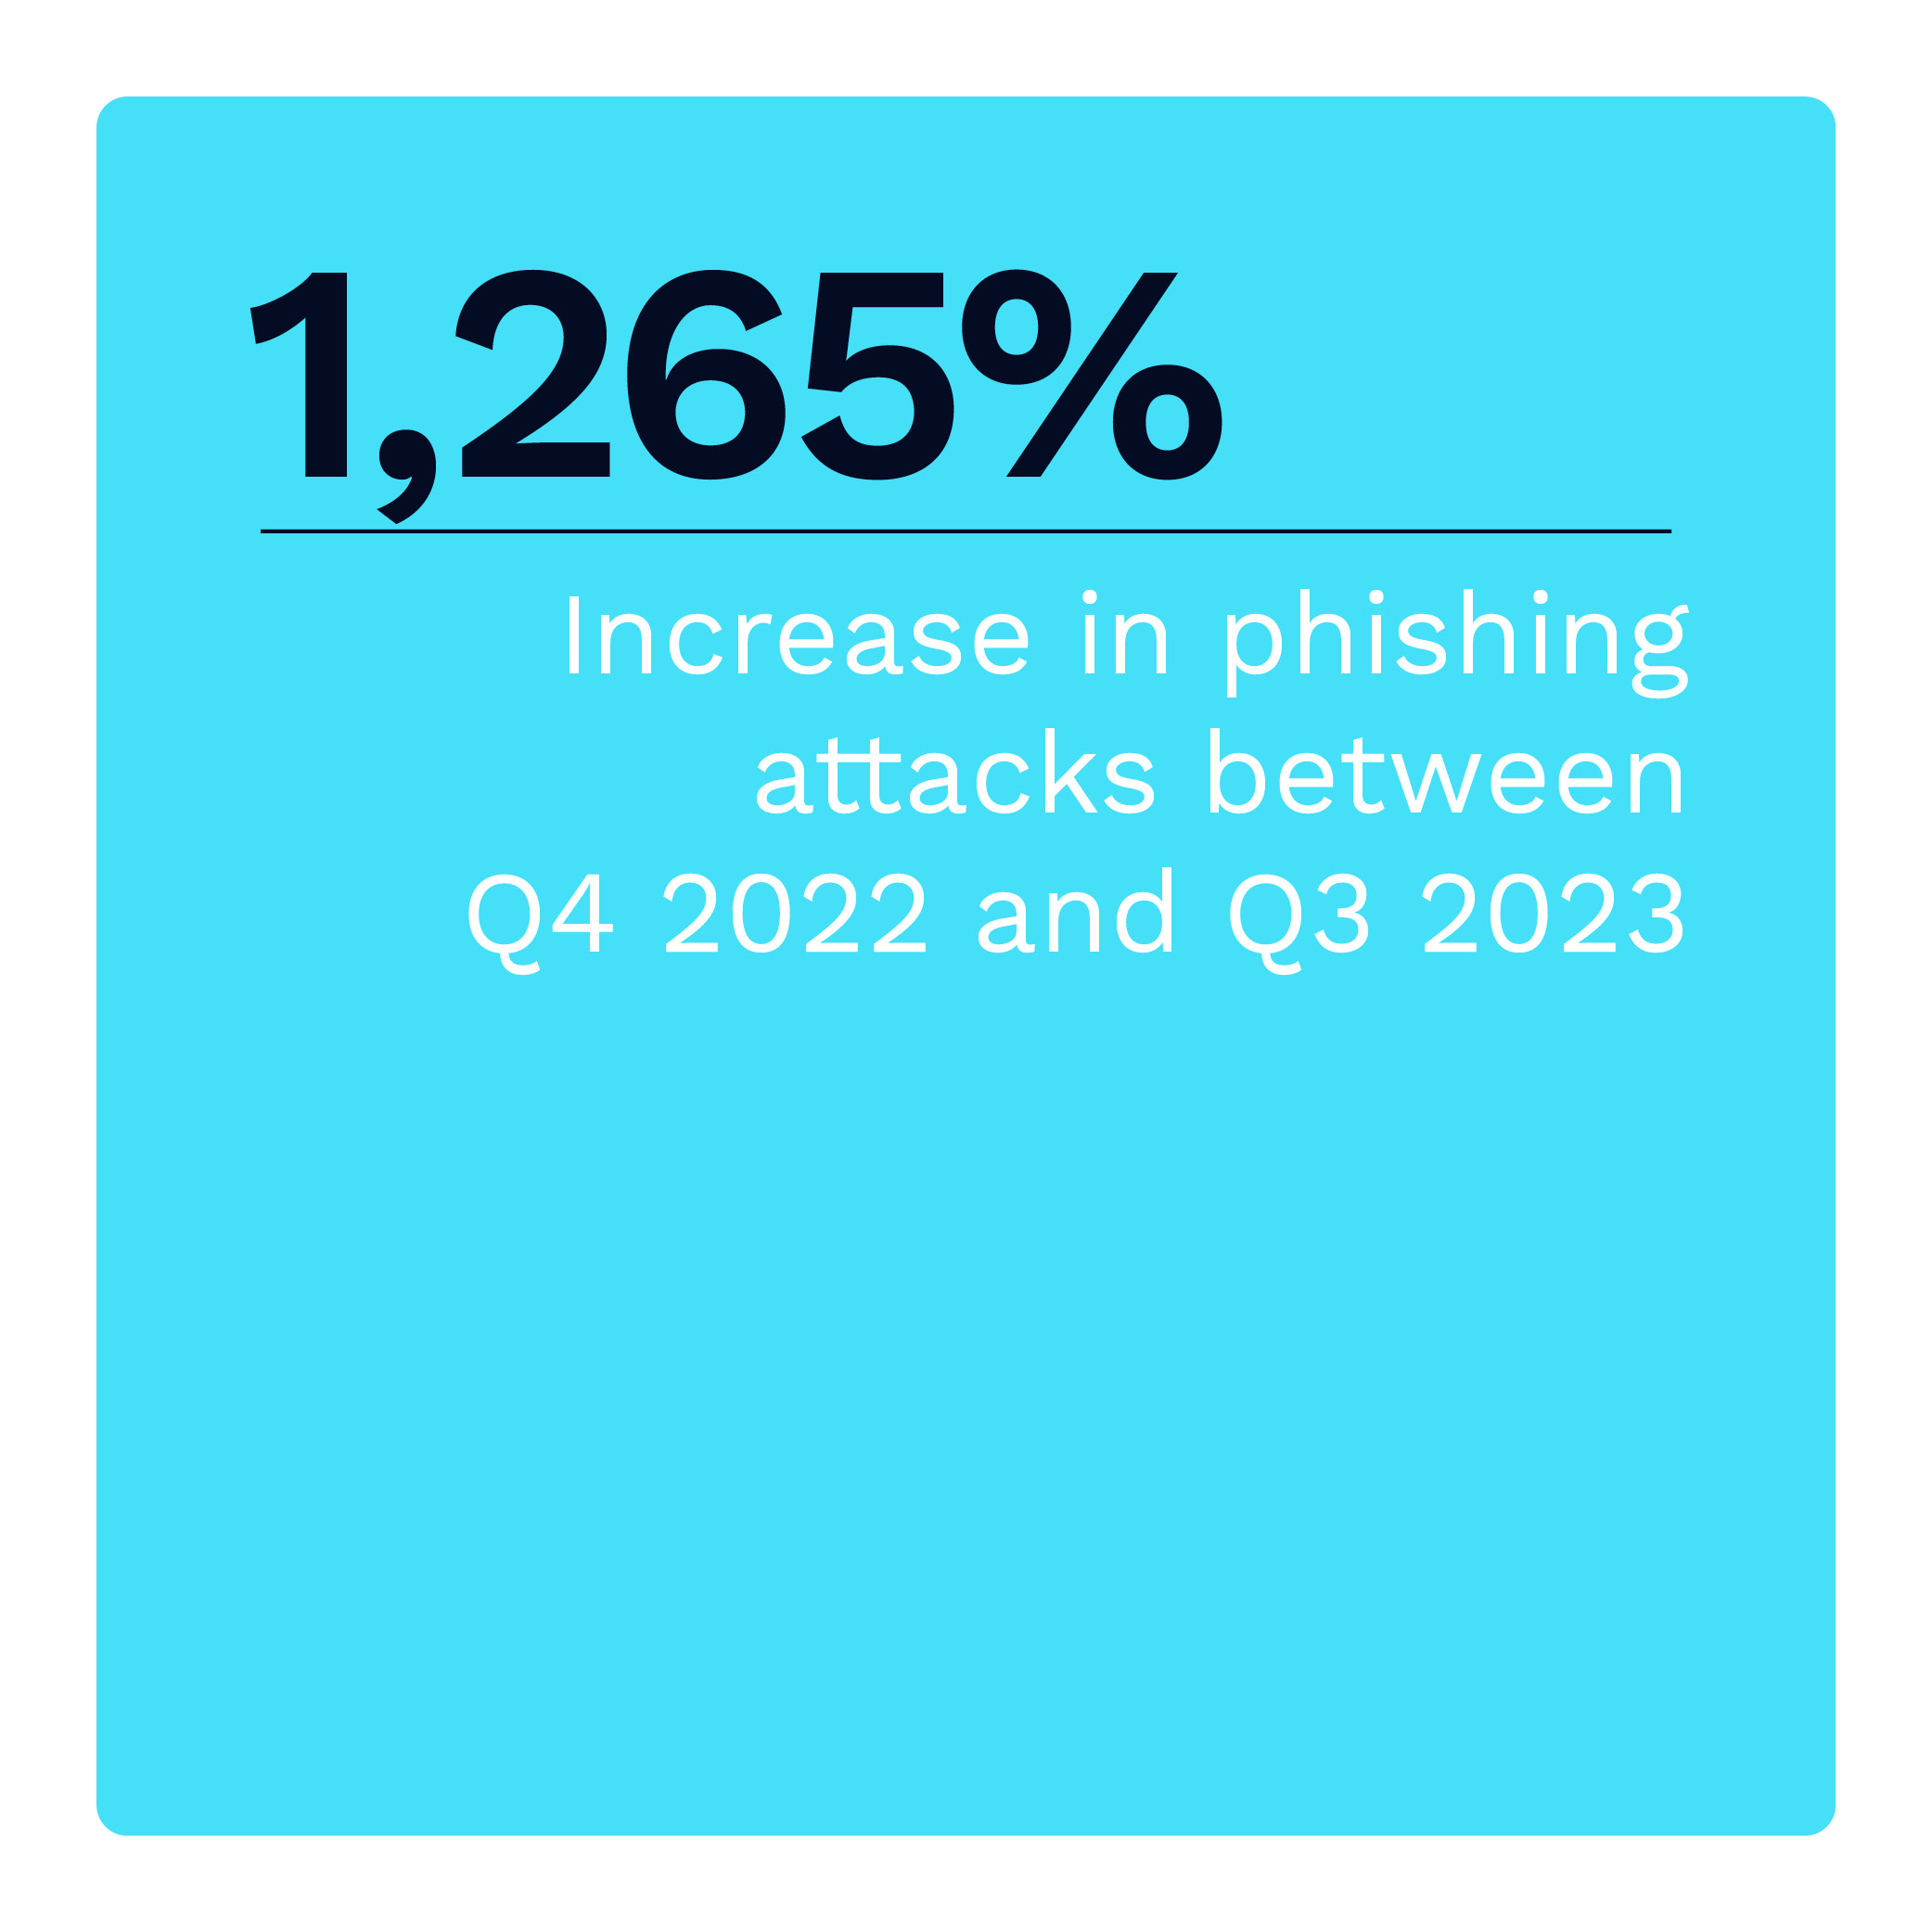 1,265%: Increase in phishing attacks between Q4 2022 and Q3 2023